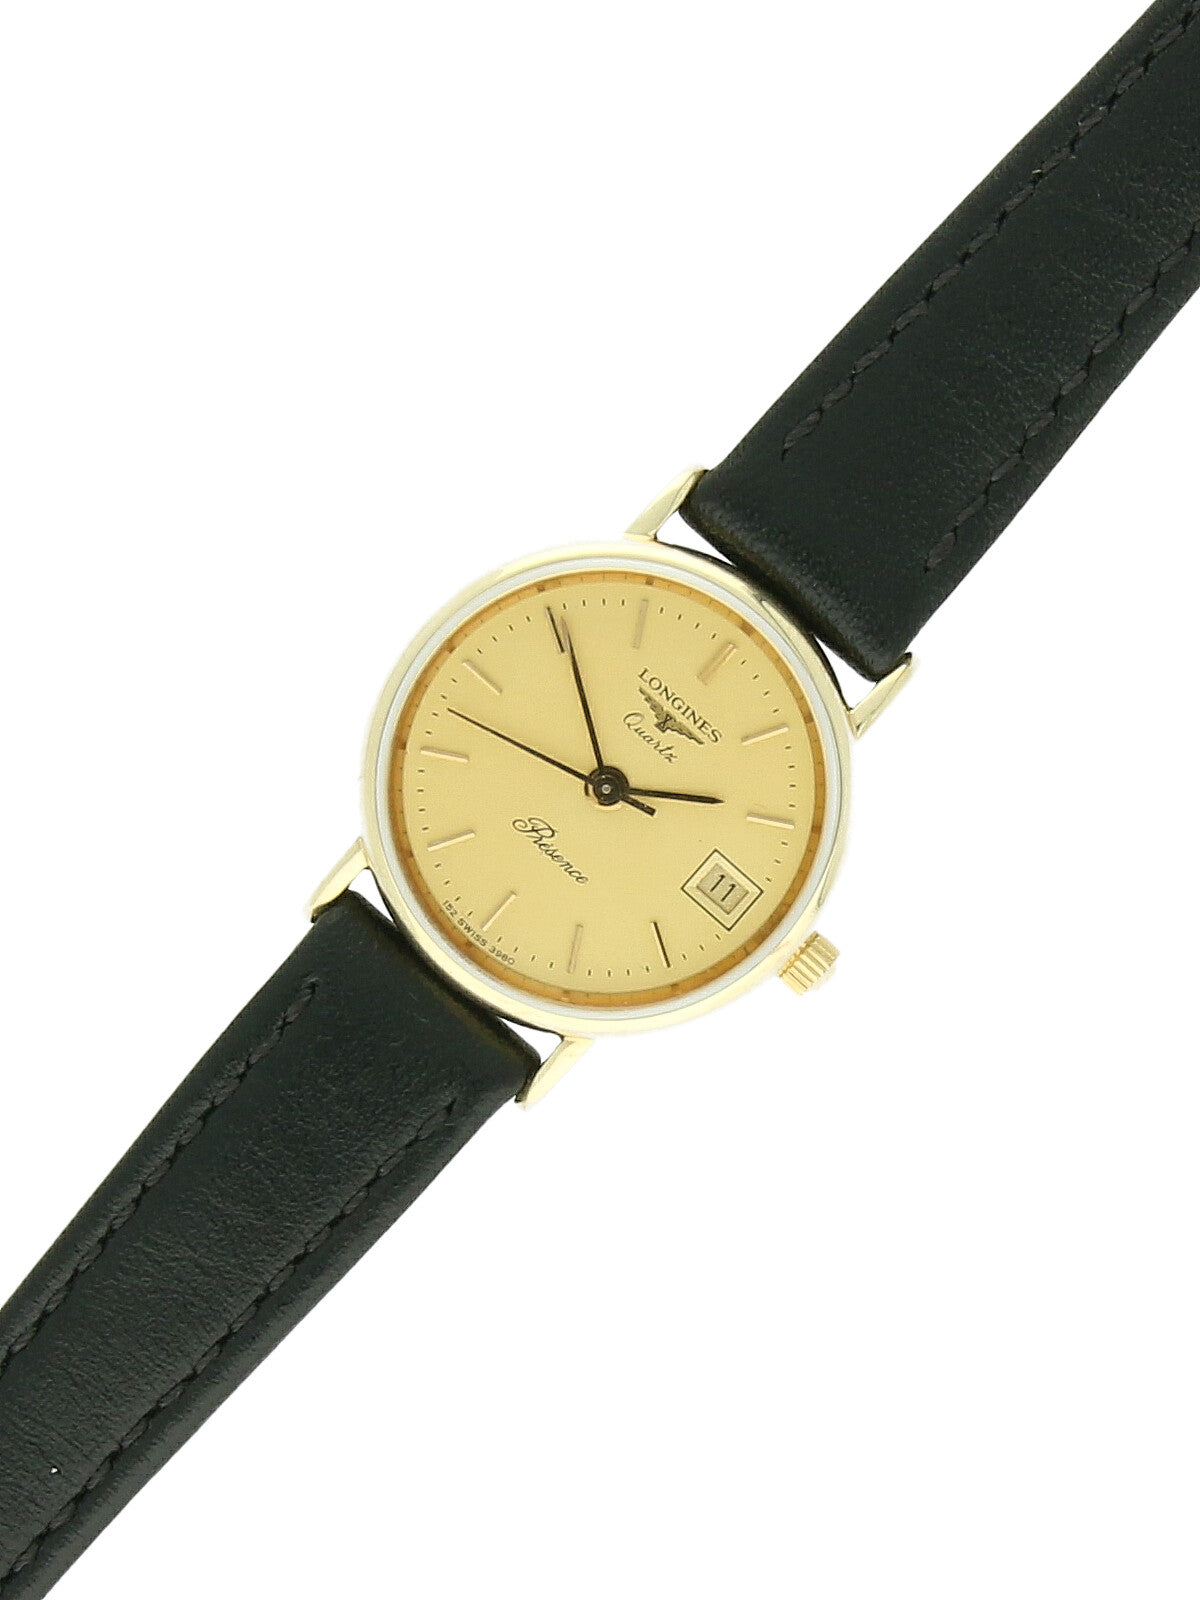 Pre Owned Longines Presence 9ct Yellow Gold Quartz Watch on Black Leather Strap